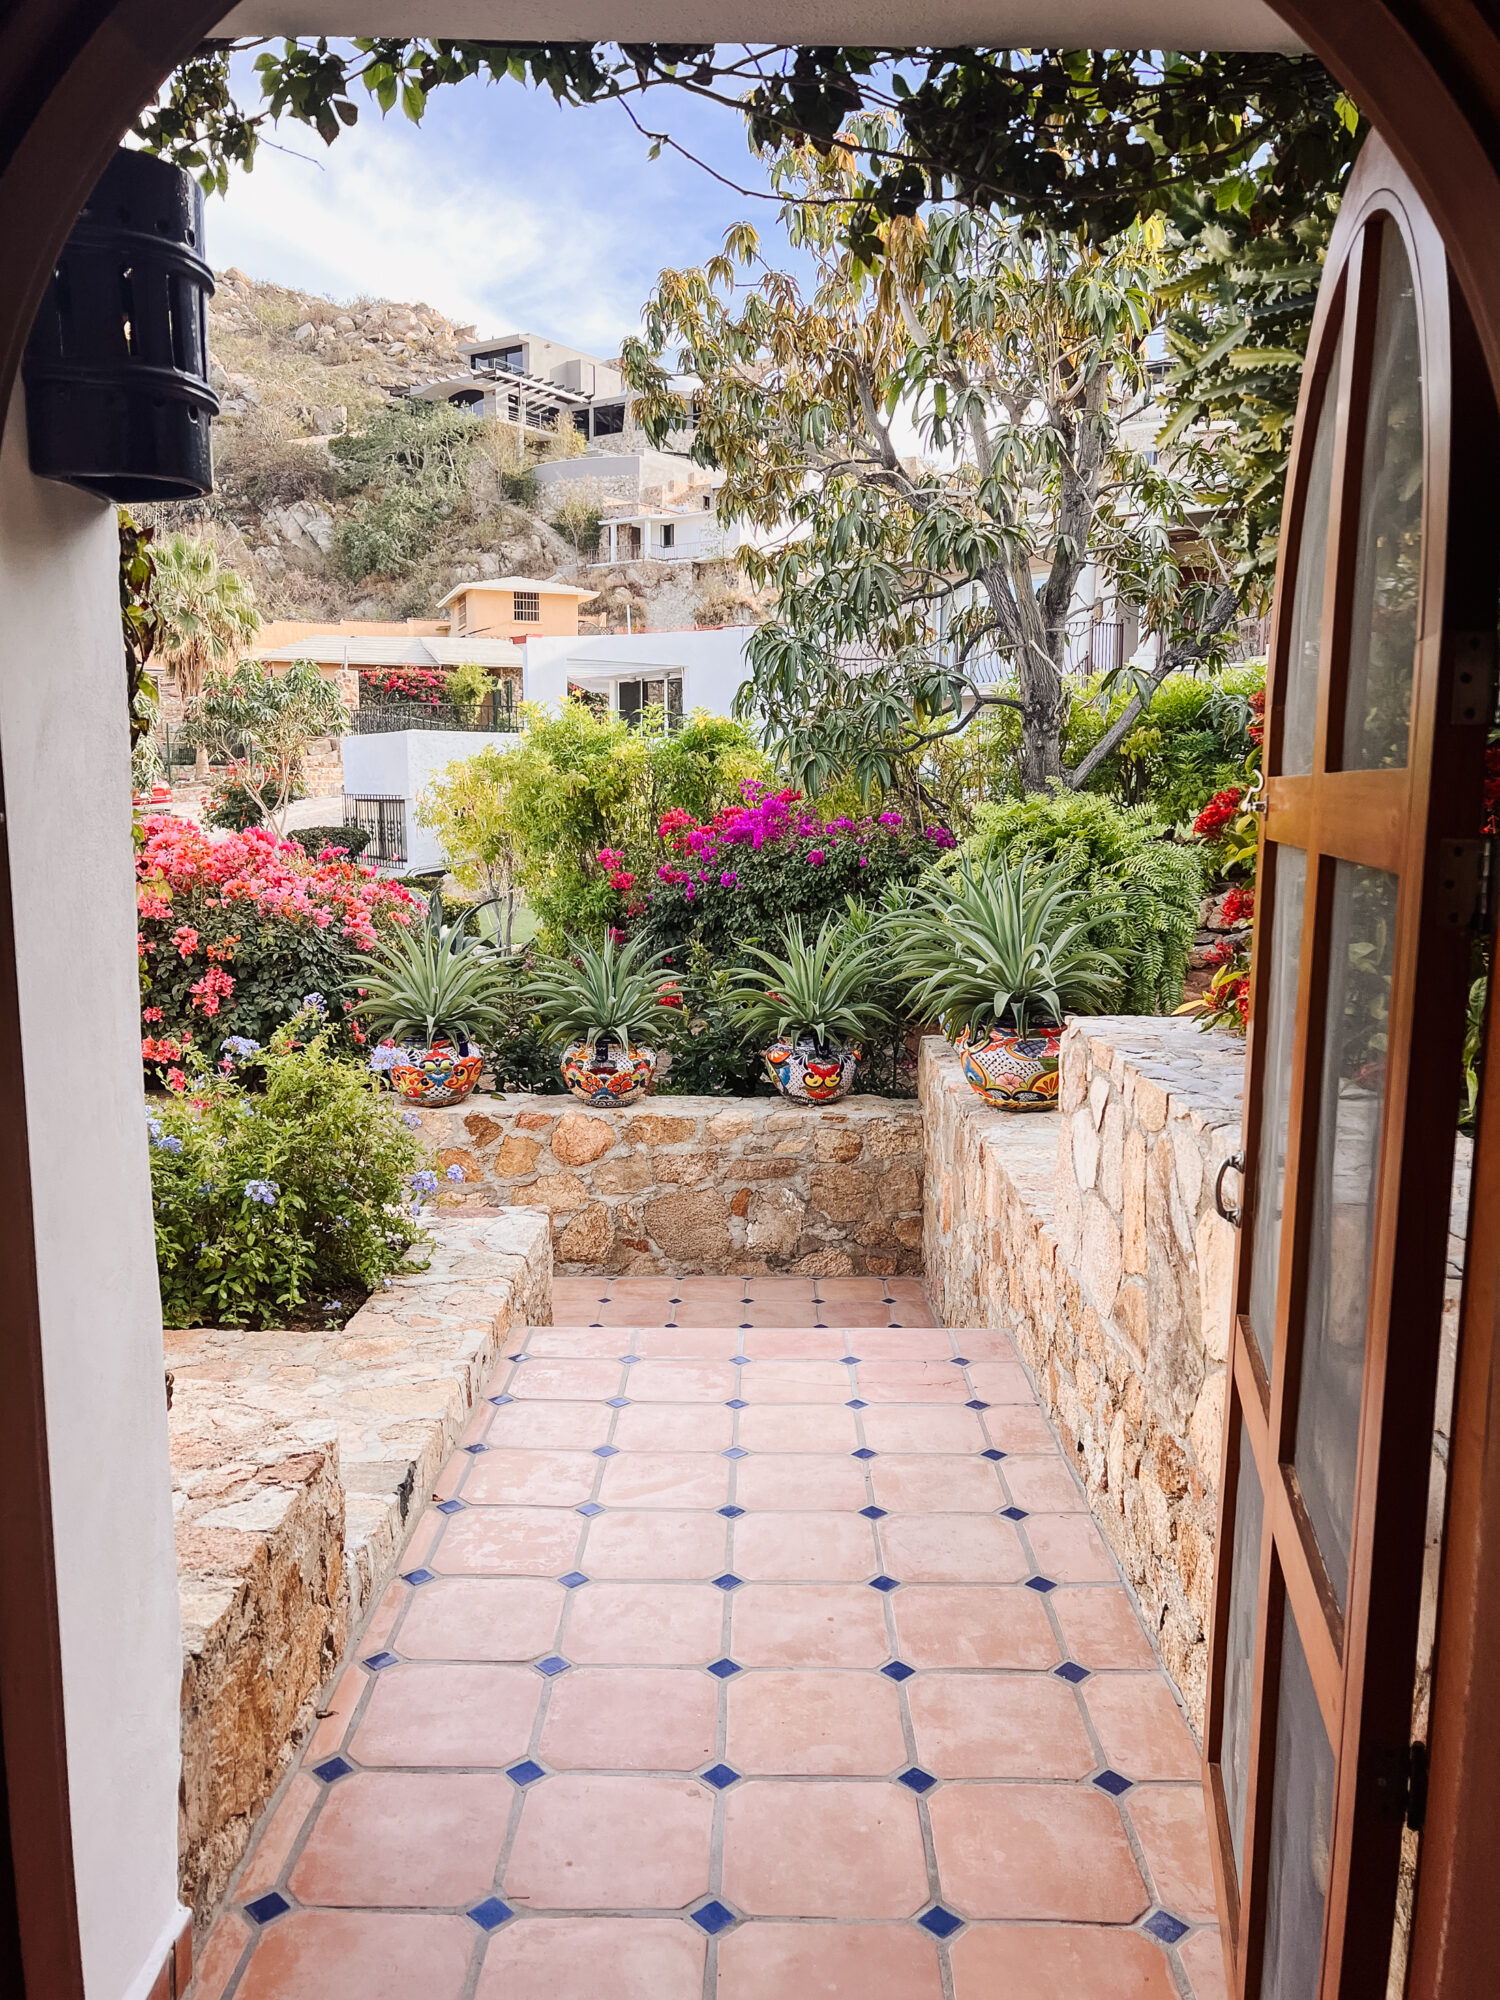 the cutest details of this spainish style baja californoa villa in cabo san lucas, mexico